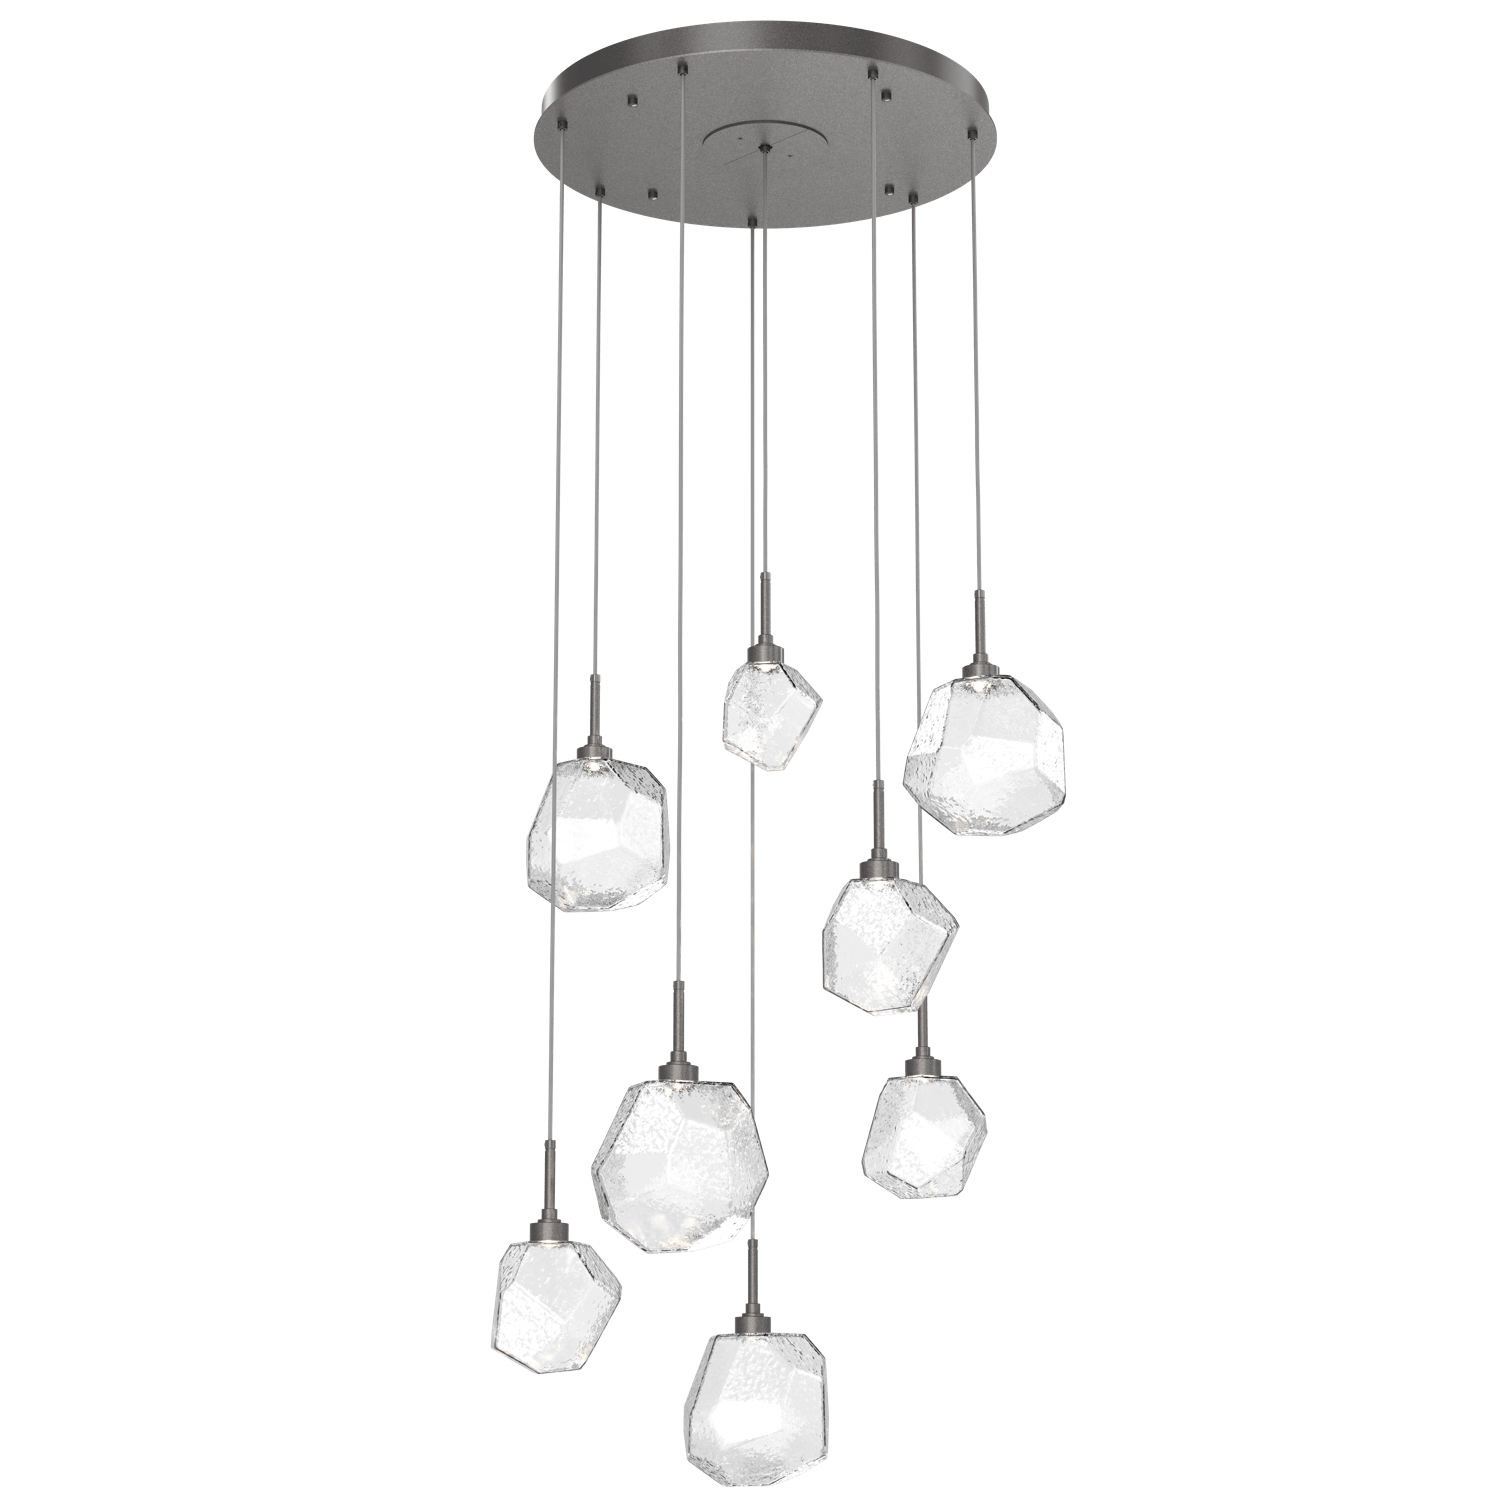 CHB0039-08-GP-C-Hammerton-Studio-Gem-8-light-round-pendant-chandelier-with-graphite-finish-and-clear-blown-glass-shades-and-LED-lamping